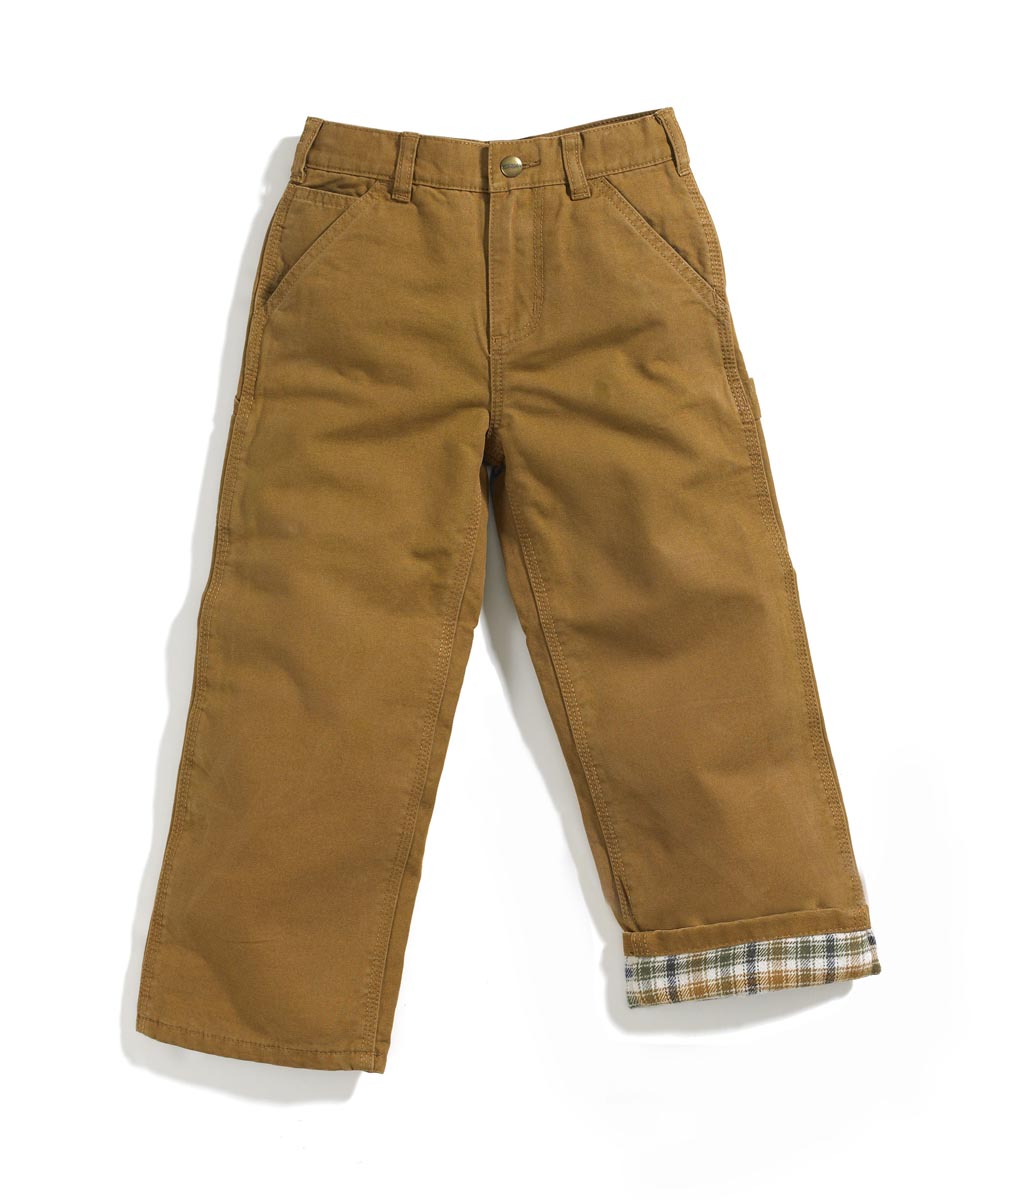 Carhartt Boys' Flannel Lined Dungaree Pant sizes 4-7